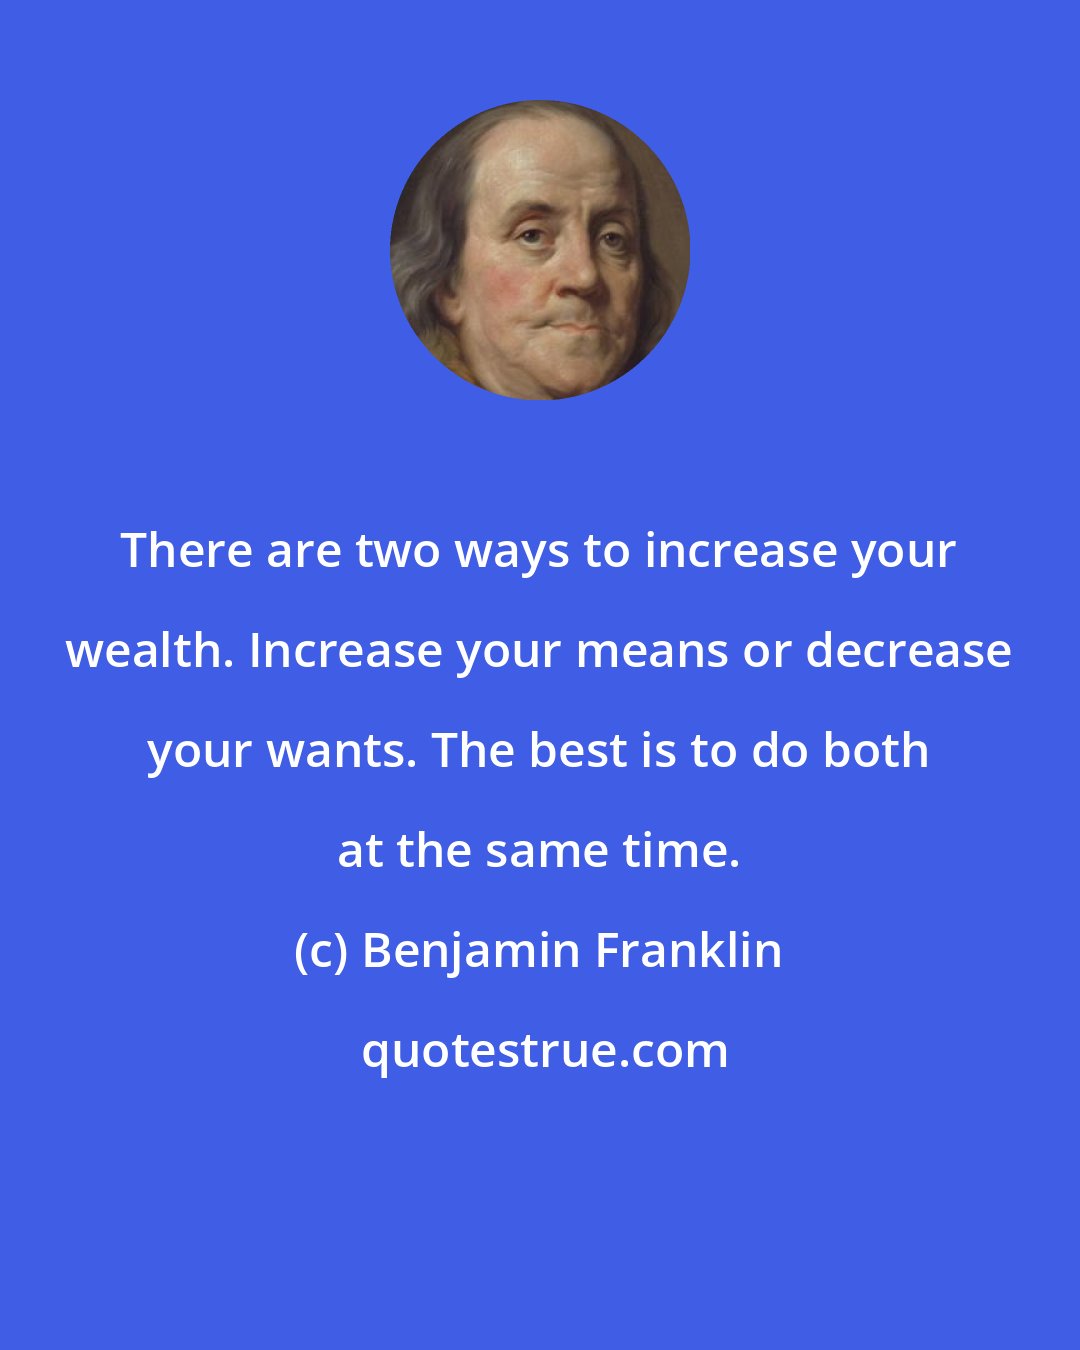 Benjamin Franklin: There are two ways to increase your wealth. Increase your means or decrease your wants. The best is to do both at the same time.